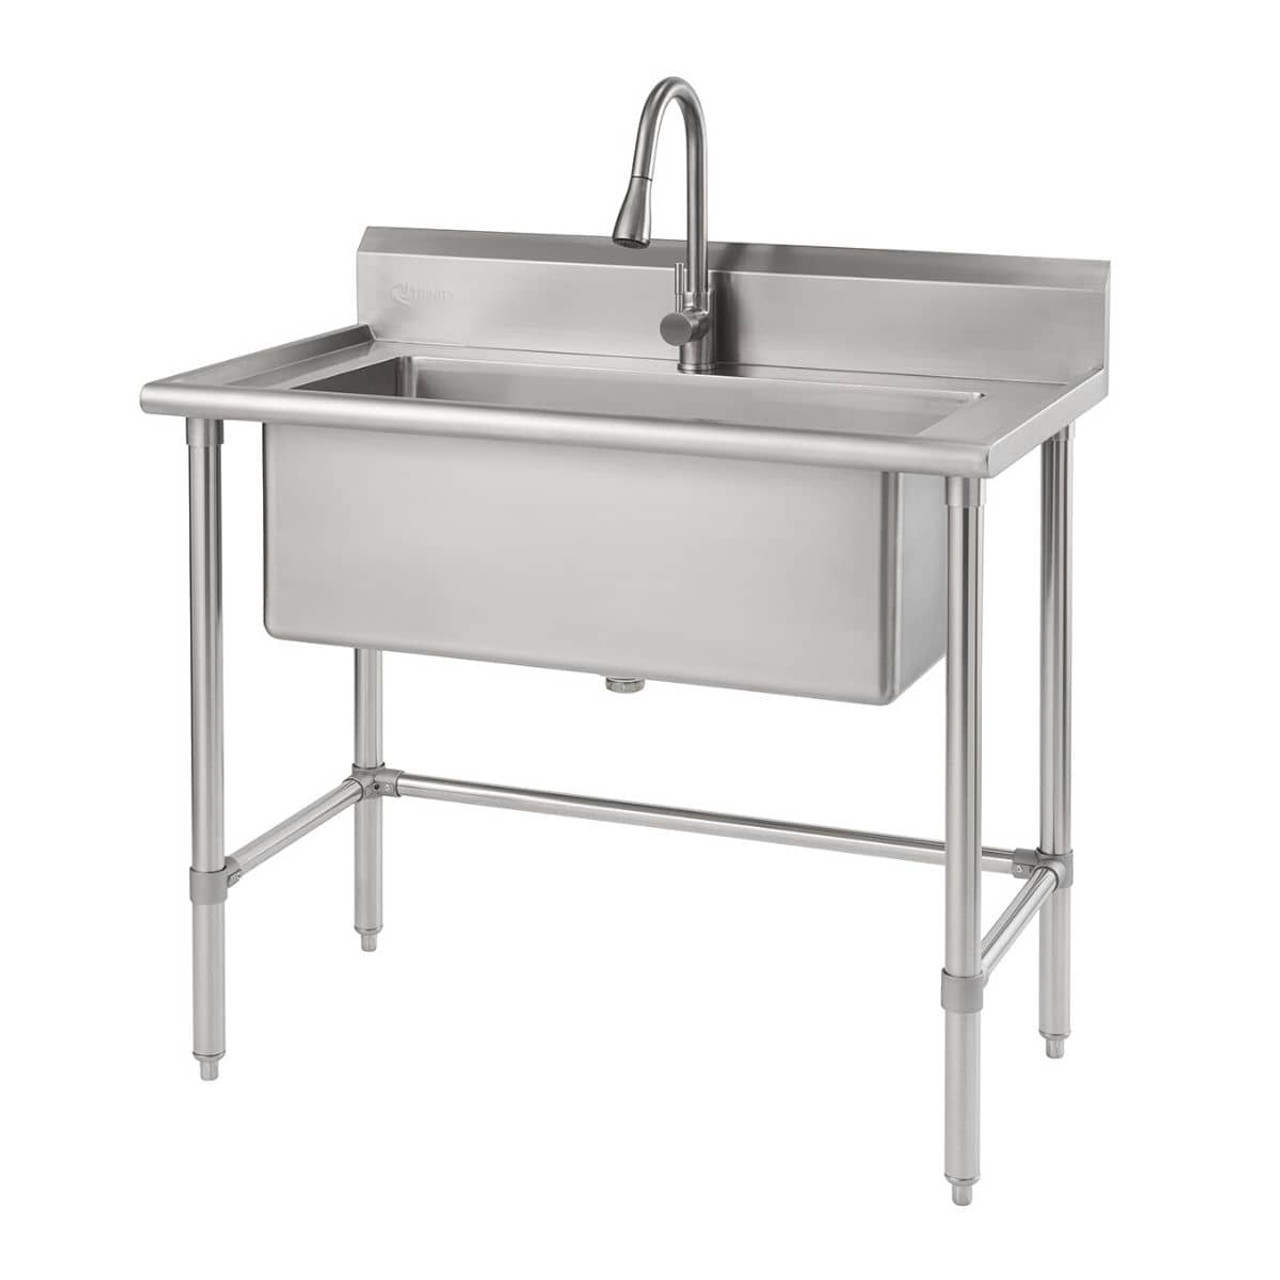 1 Compartment Utility Sink Drain Board Kitchen Sink Prep Table Stainless  Steel